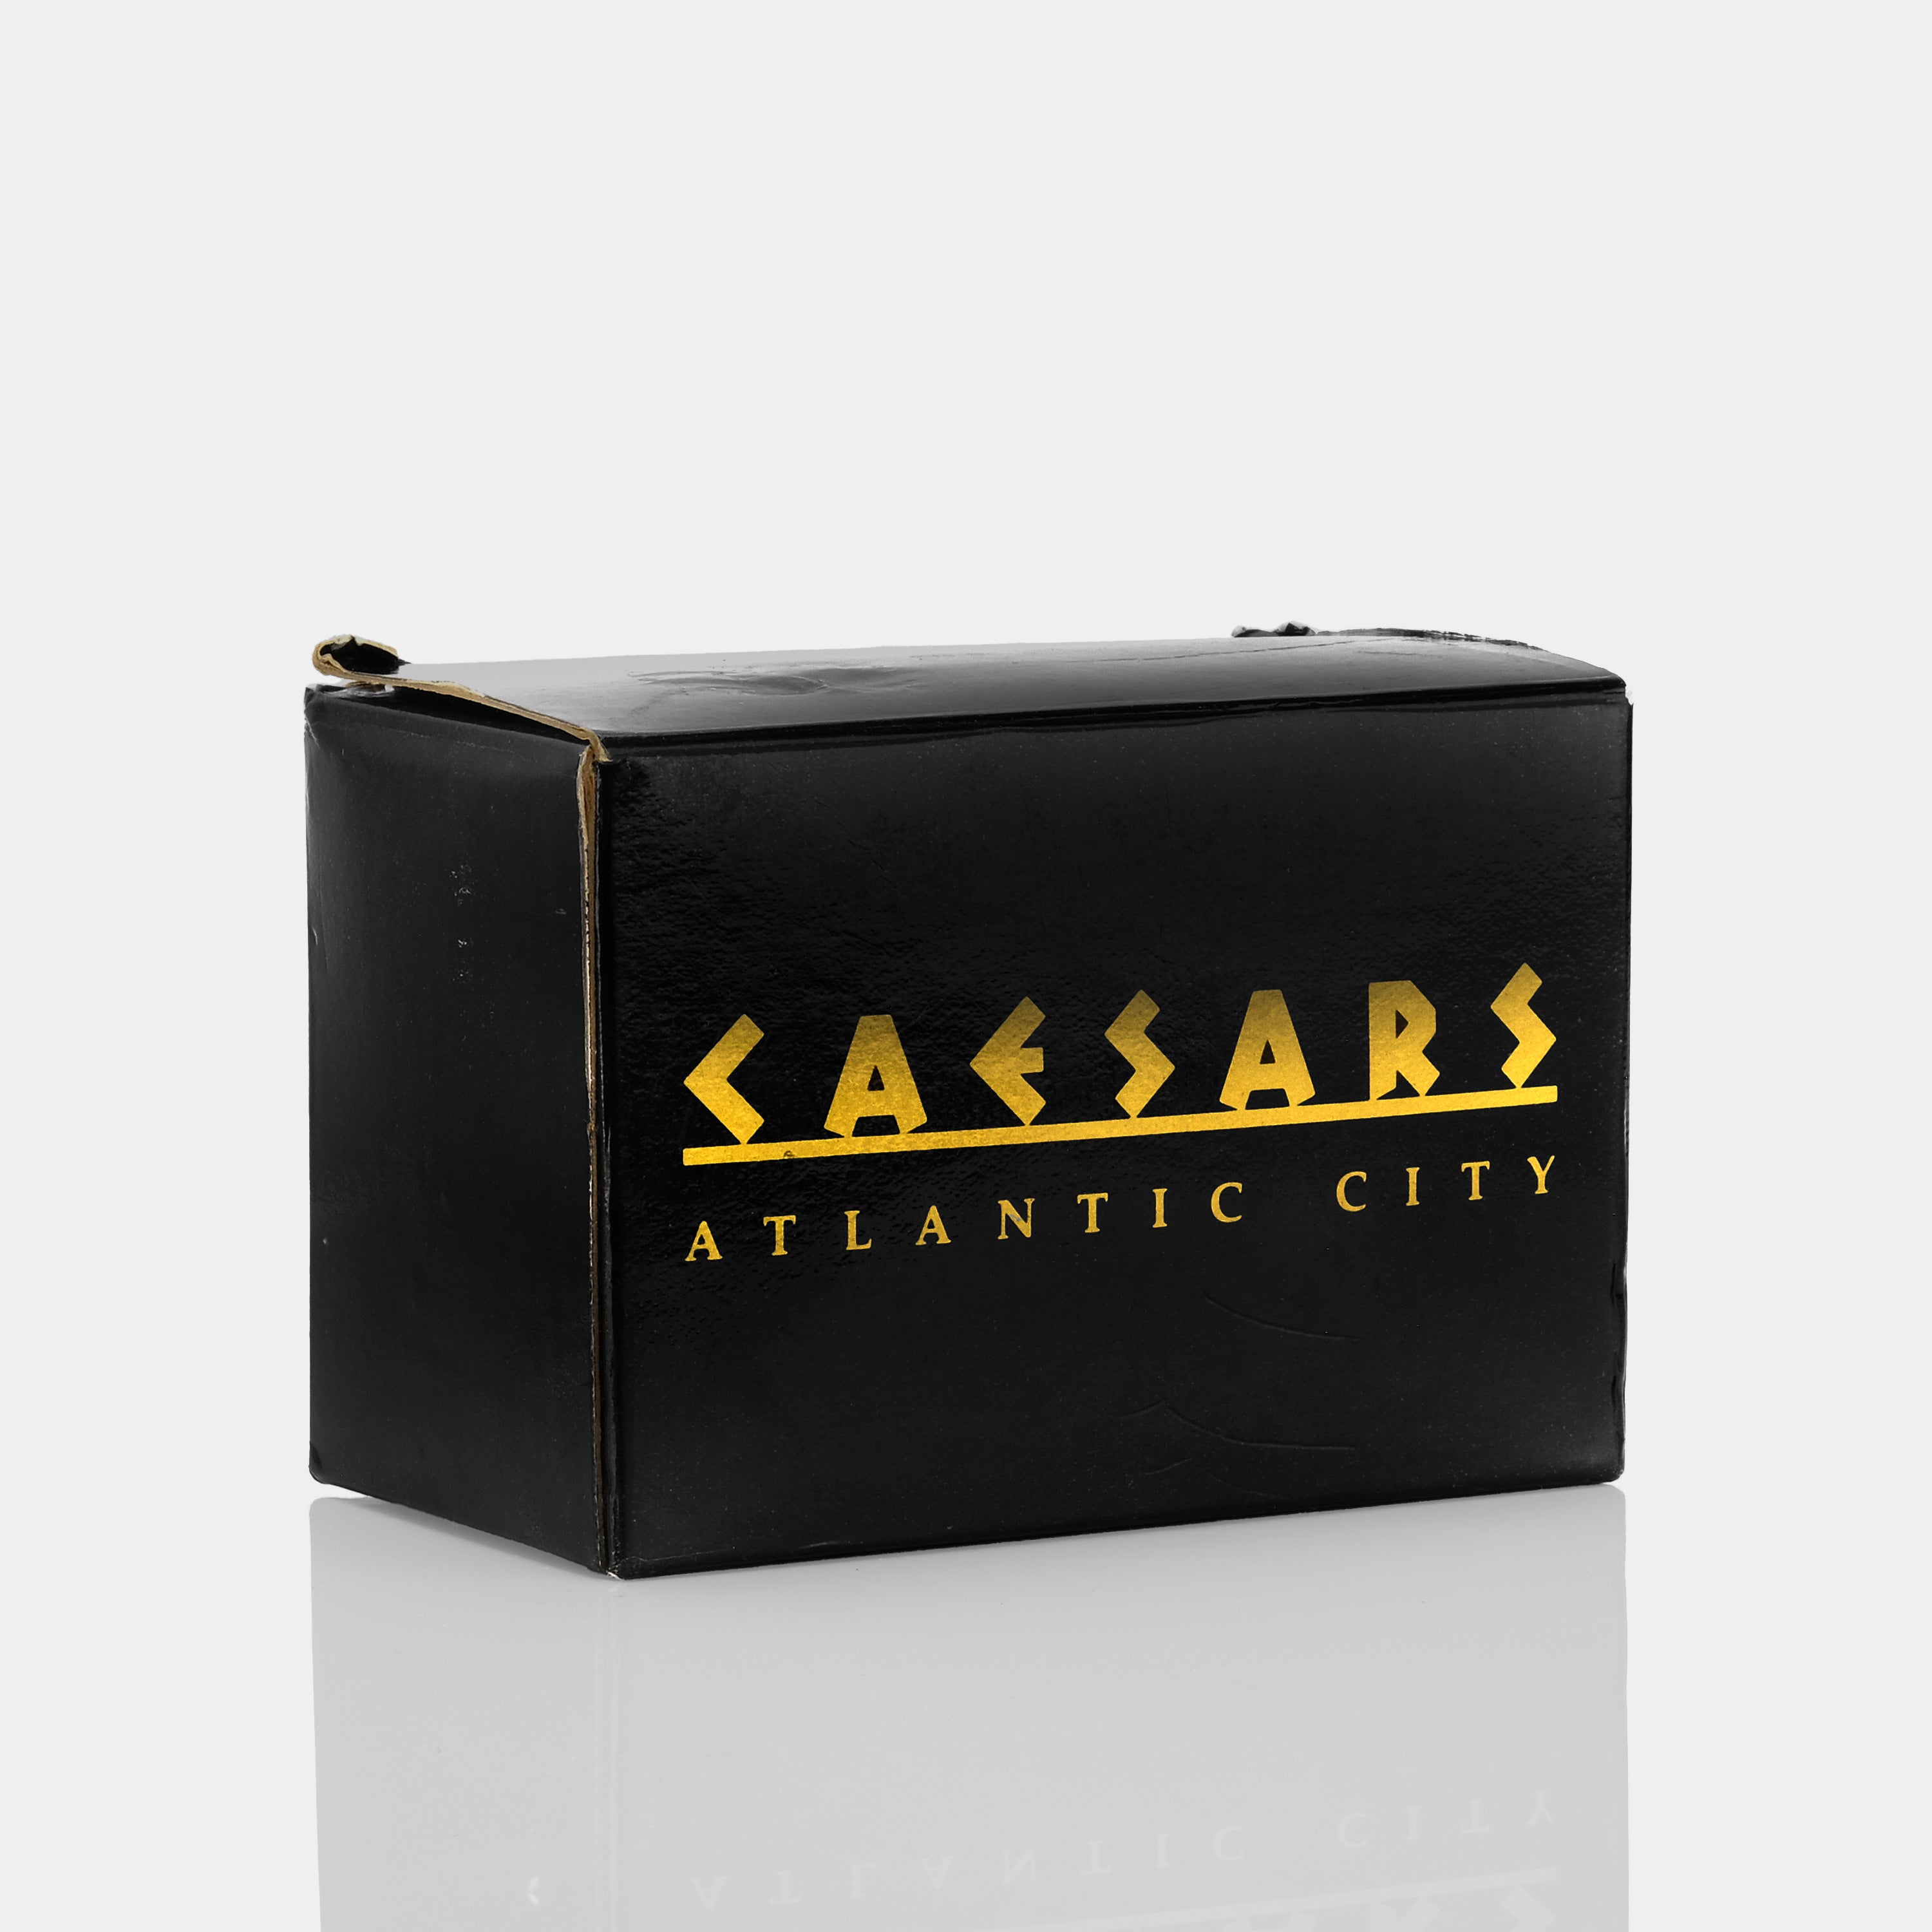 Caesars Atlantic City Black and Gold Point and Shoot 35mm Film Camera (New Old Stock)